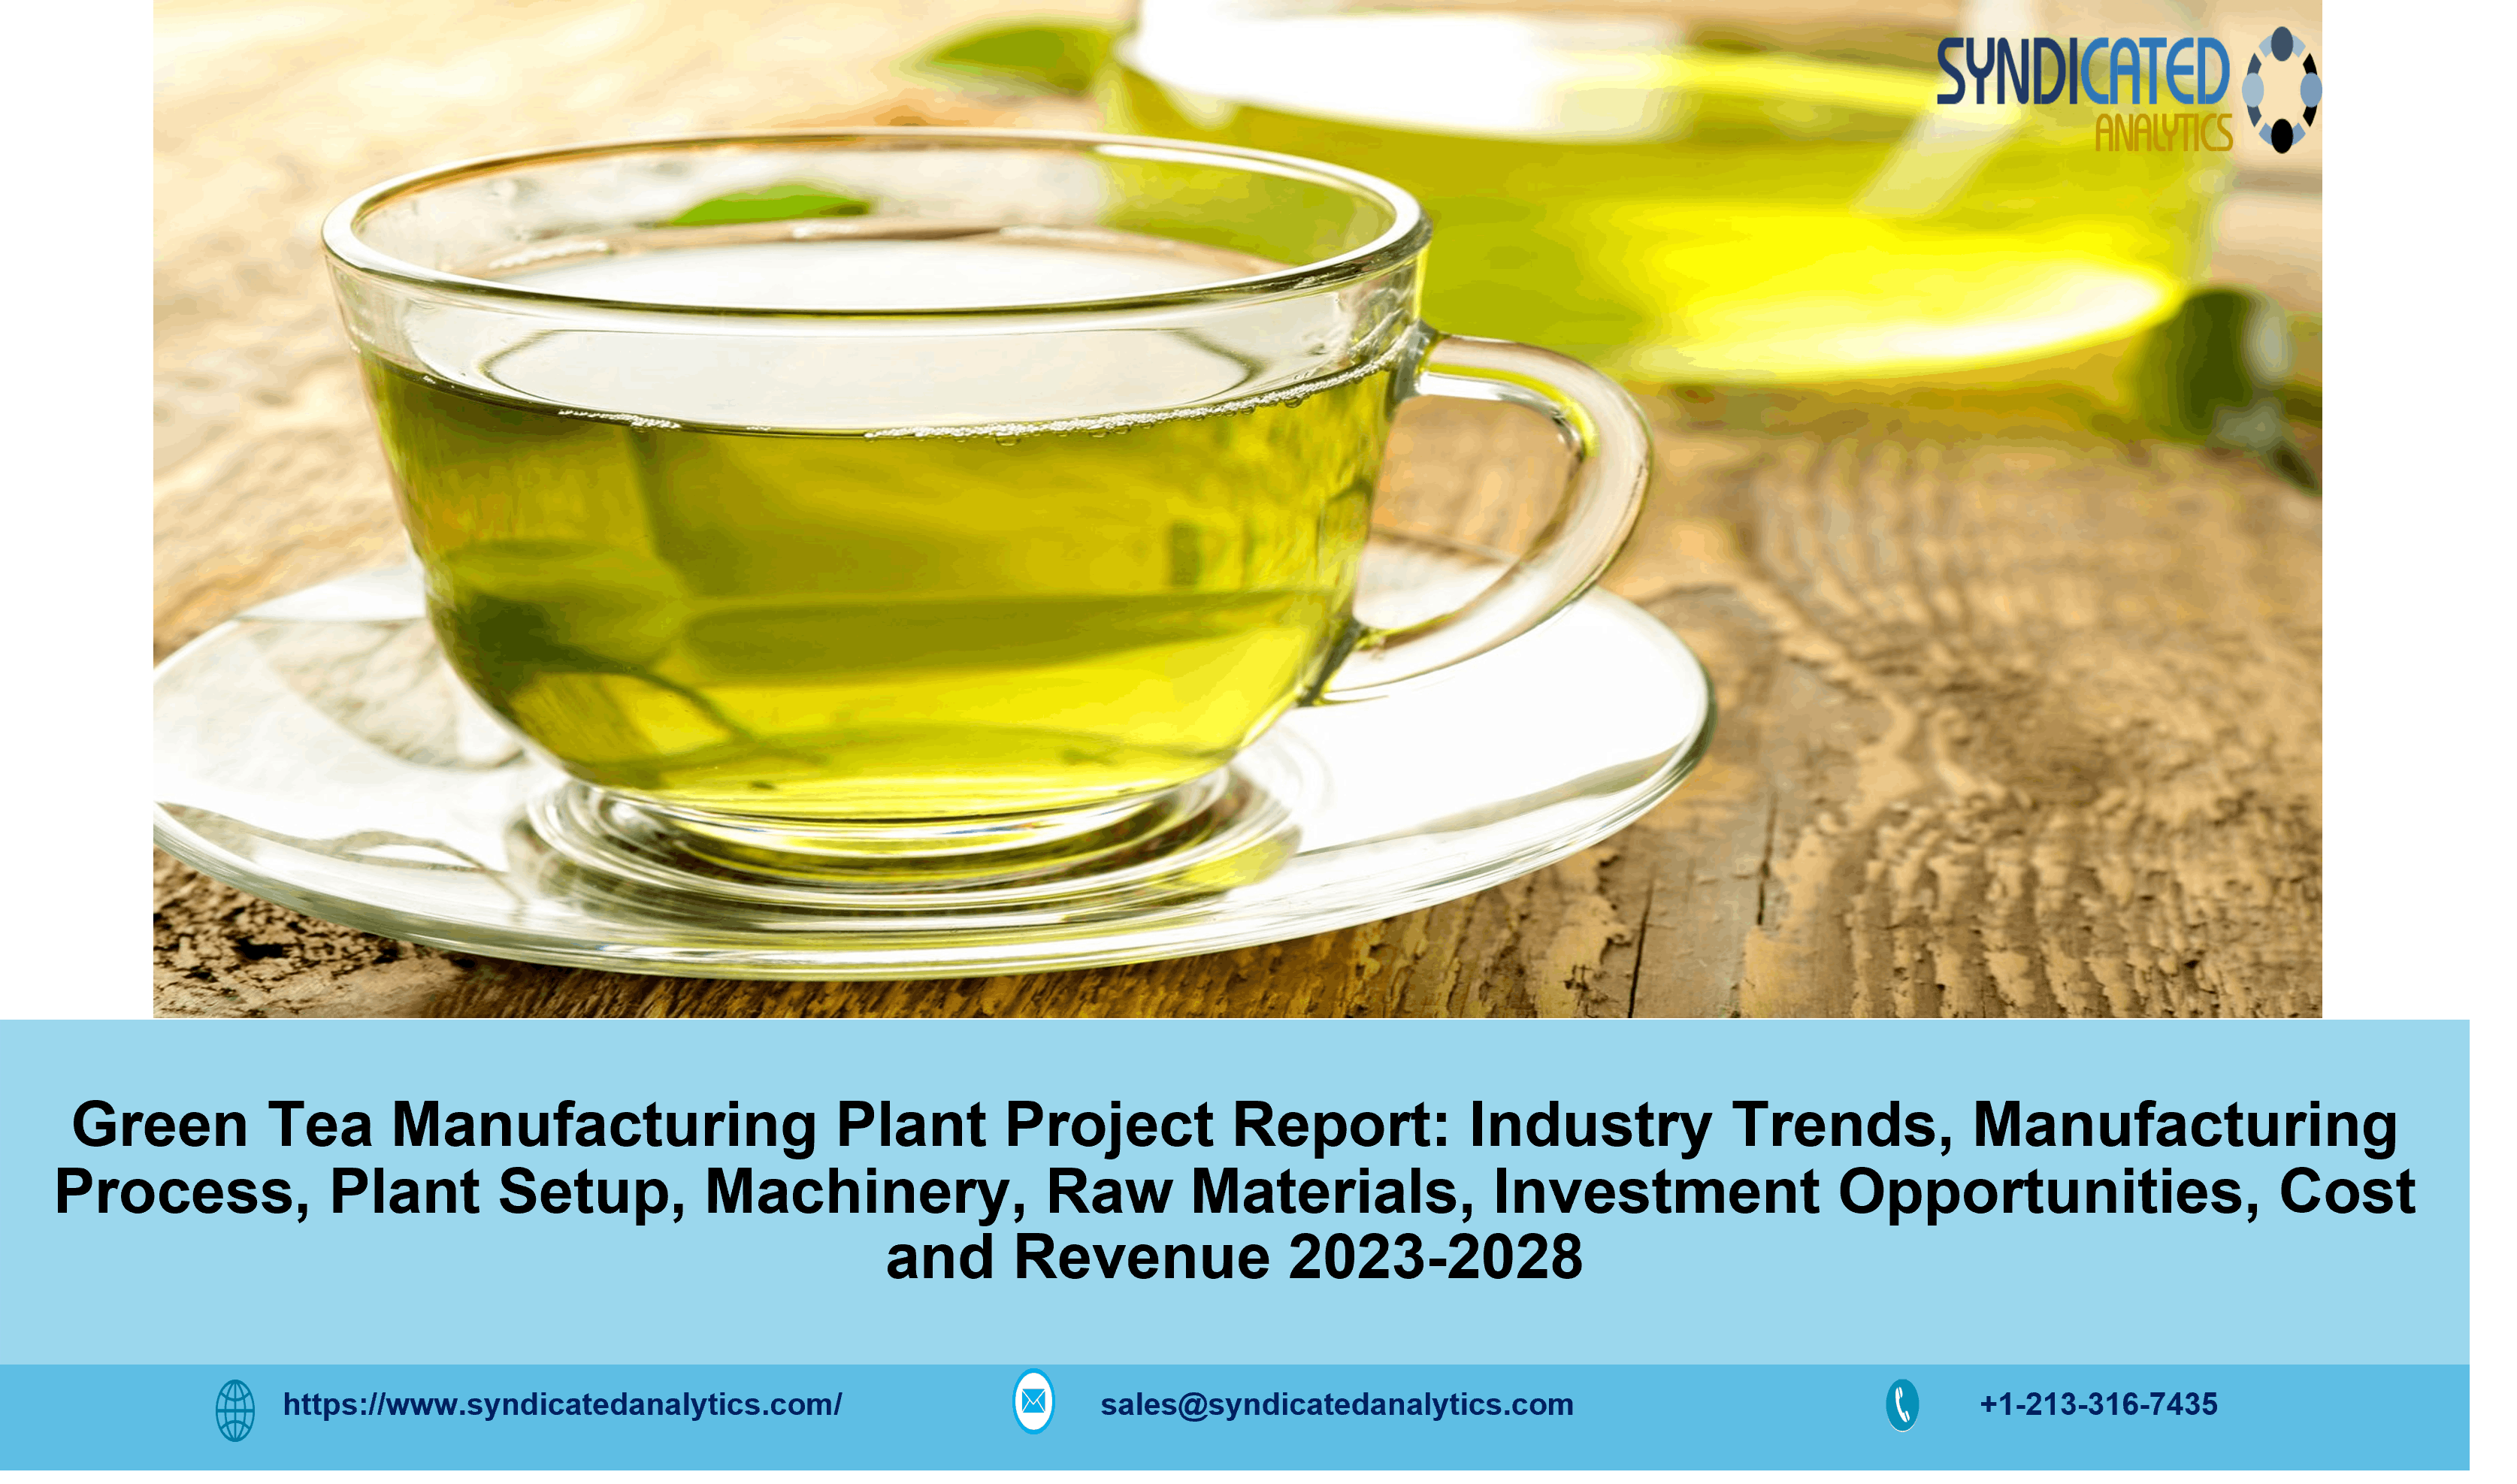 Green Tea Manufacturing Plant Project Report.png